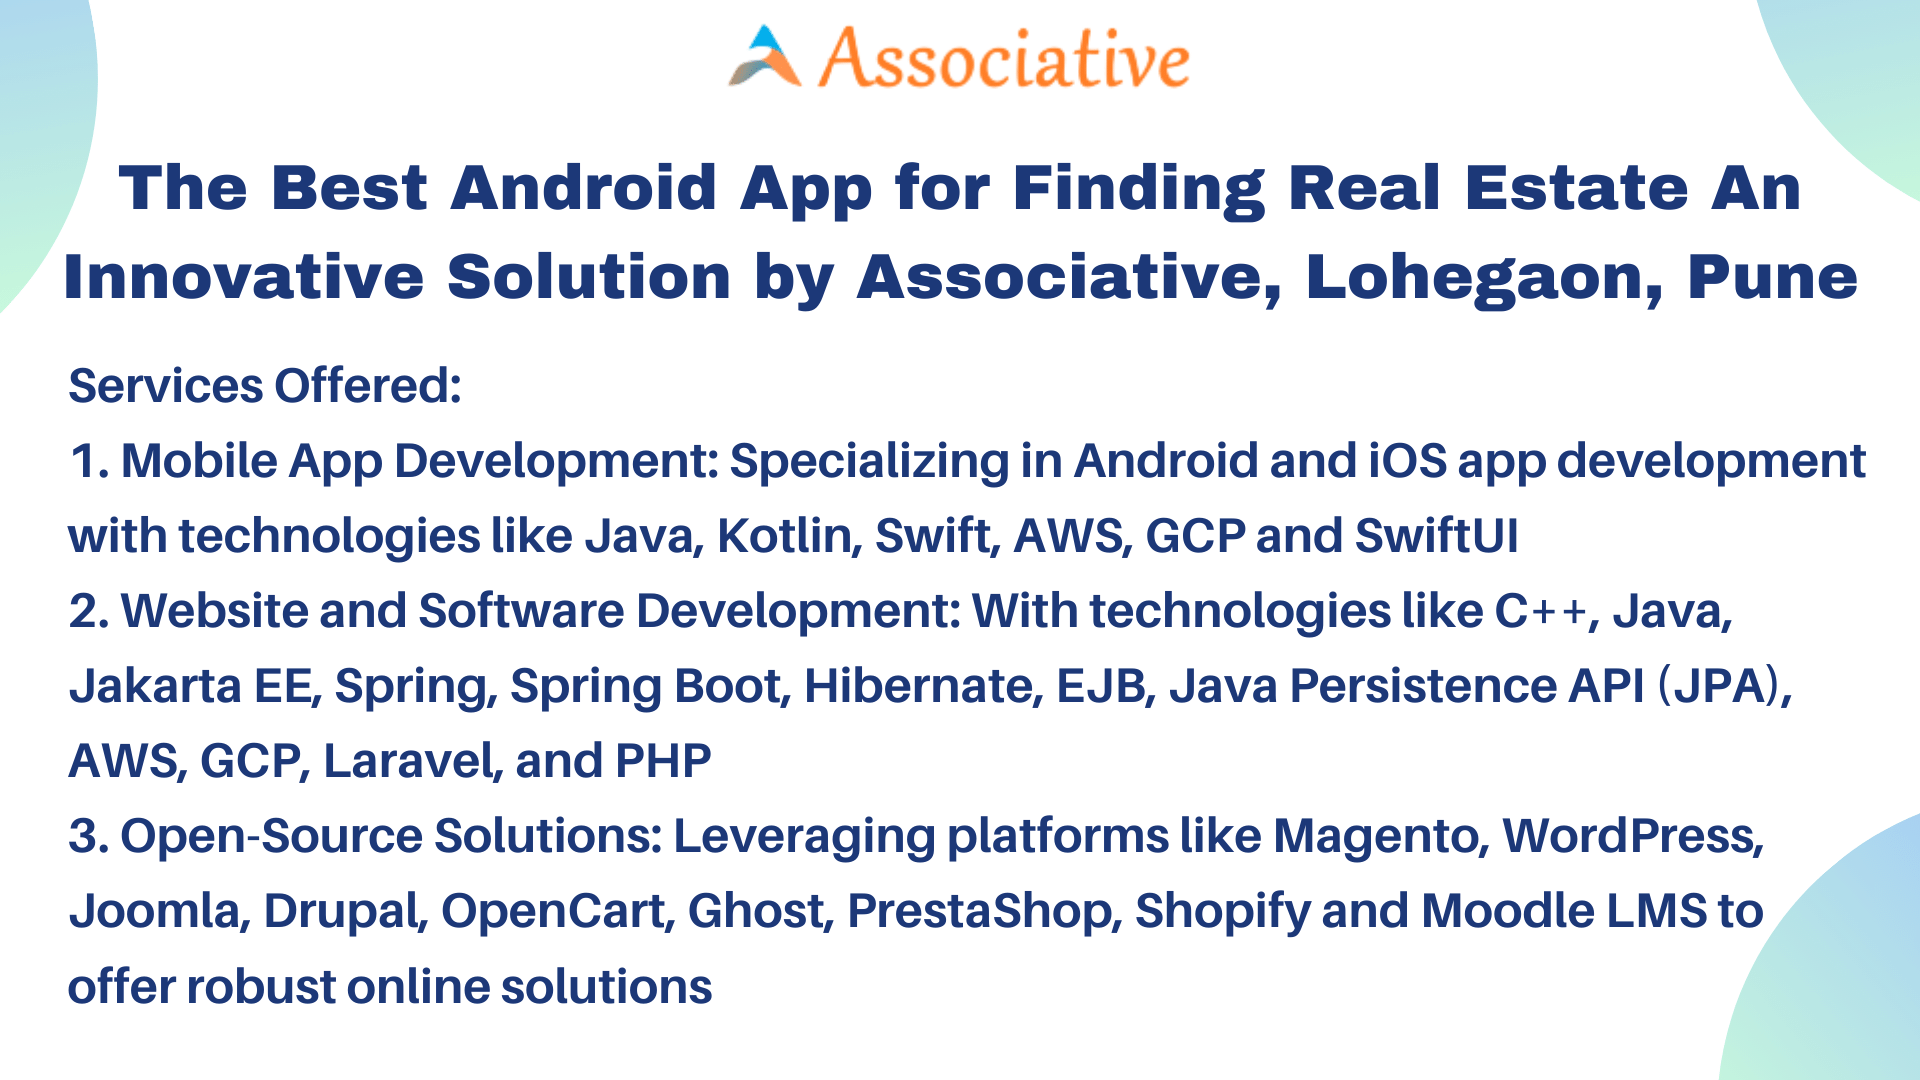 The Best Android App for Finding Real Estate An Innovative Solution by Associative, Lohegaon, Pune